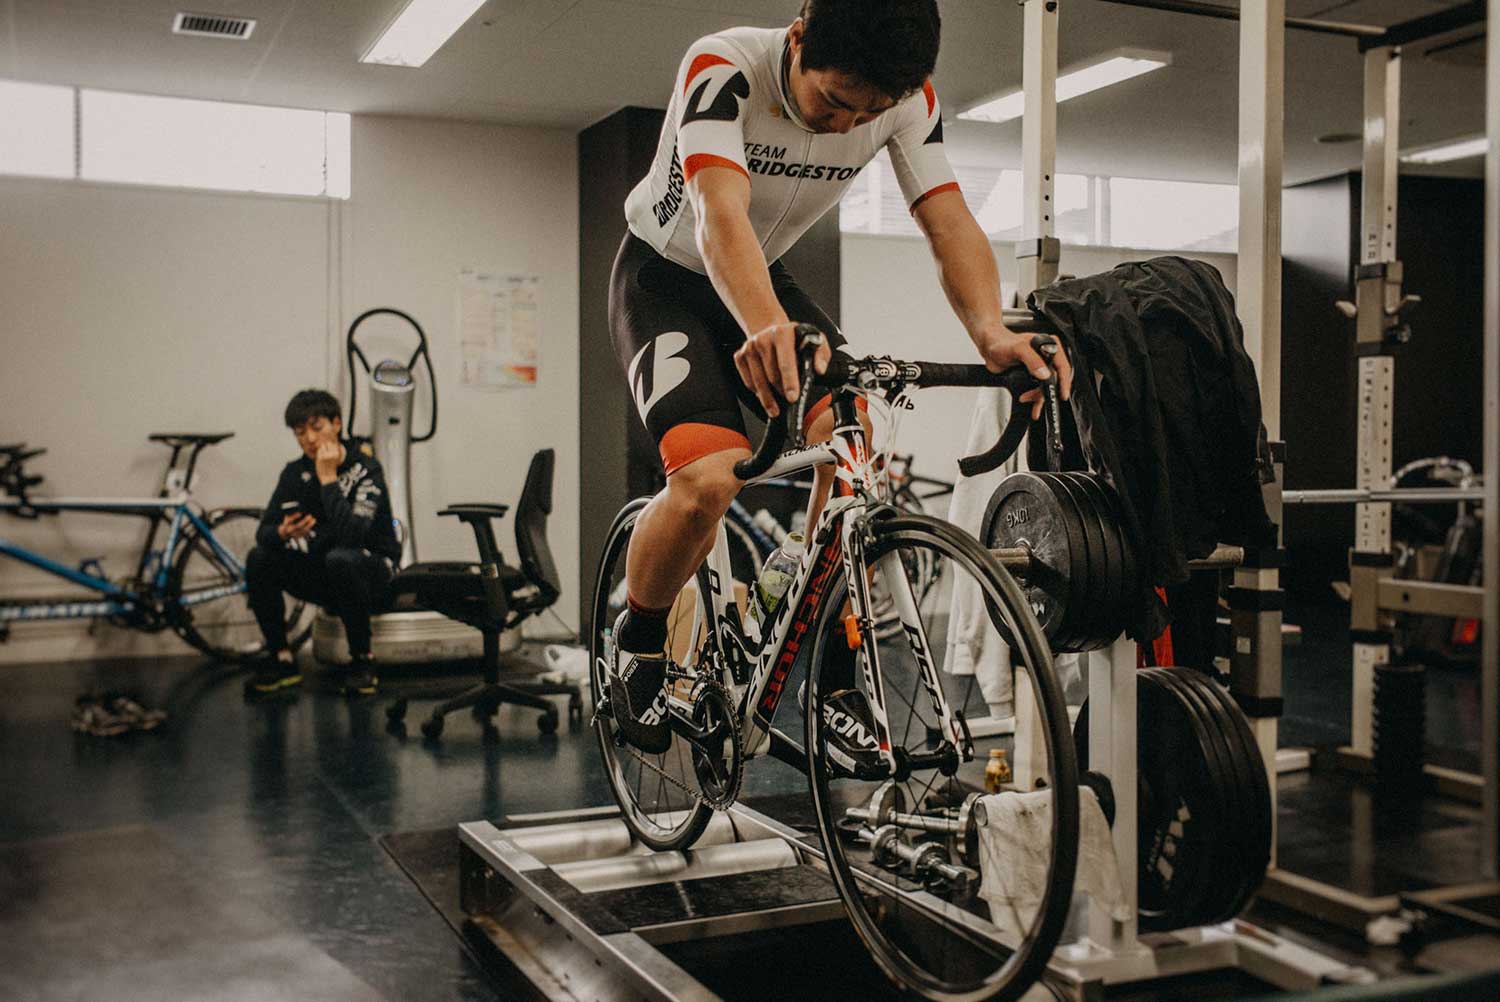 Japan Olympic track cyclist trains on static rollers to test cycling foot orthotics at Izu Velodrome, Japan